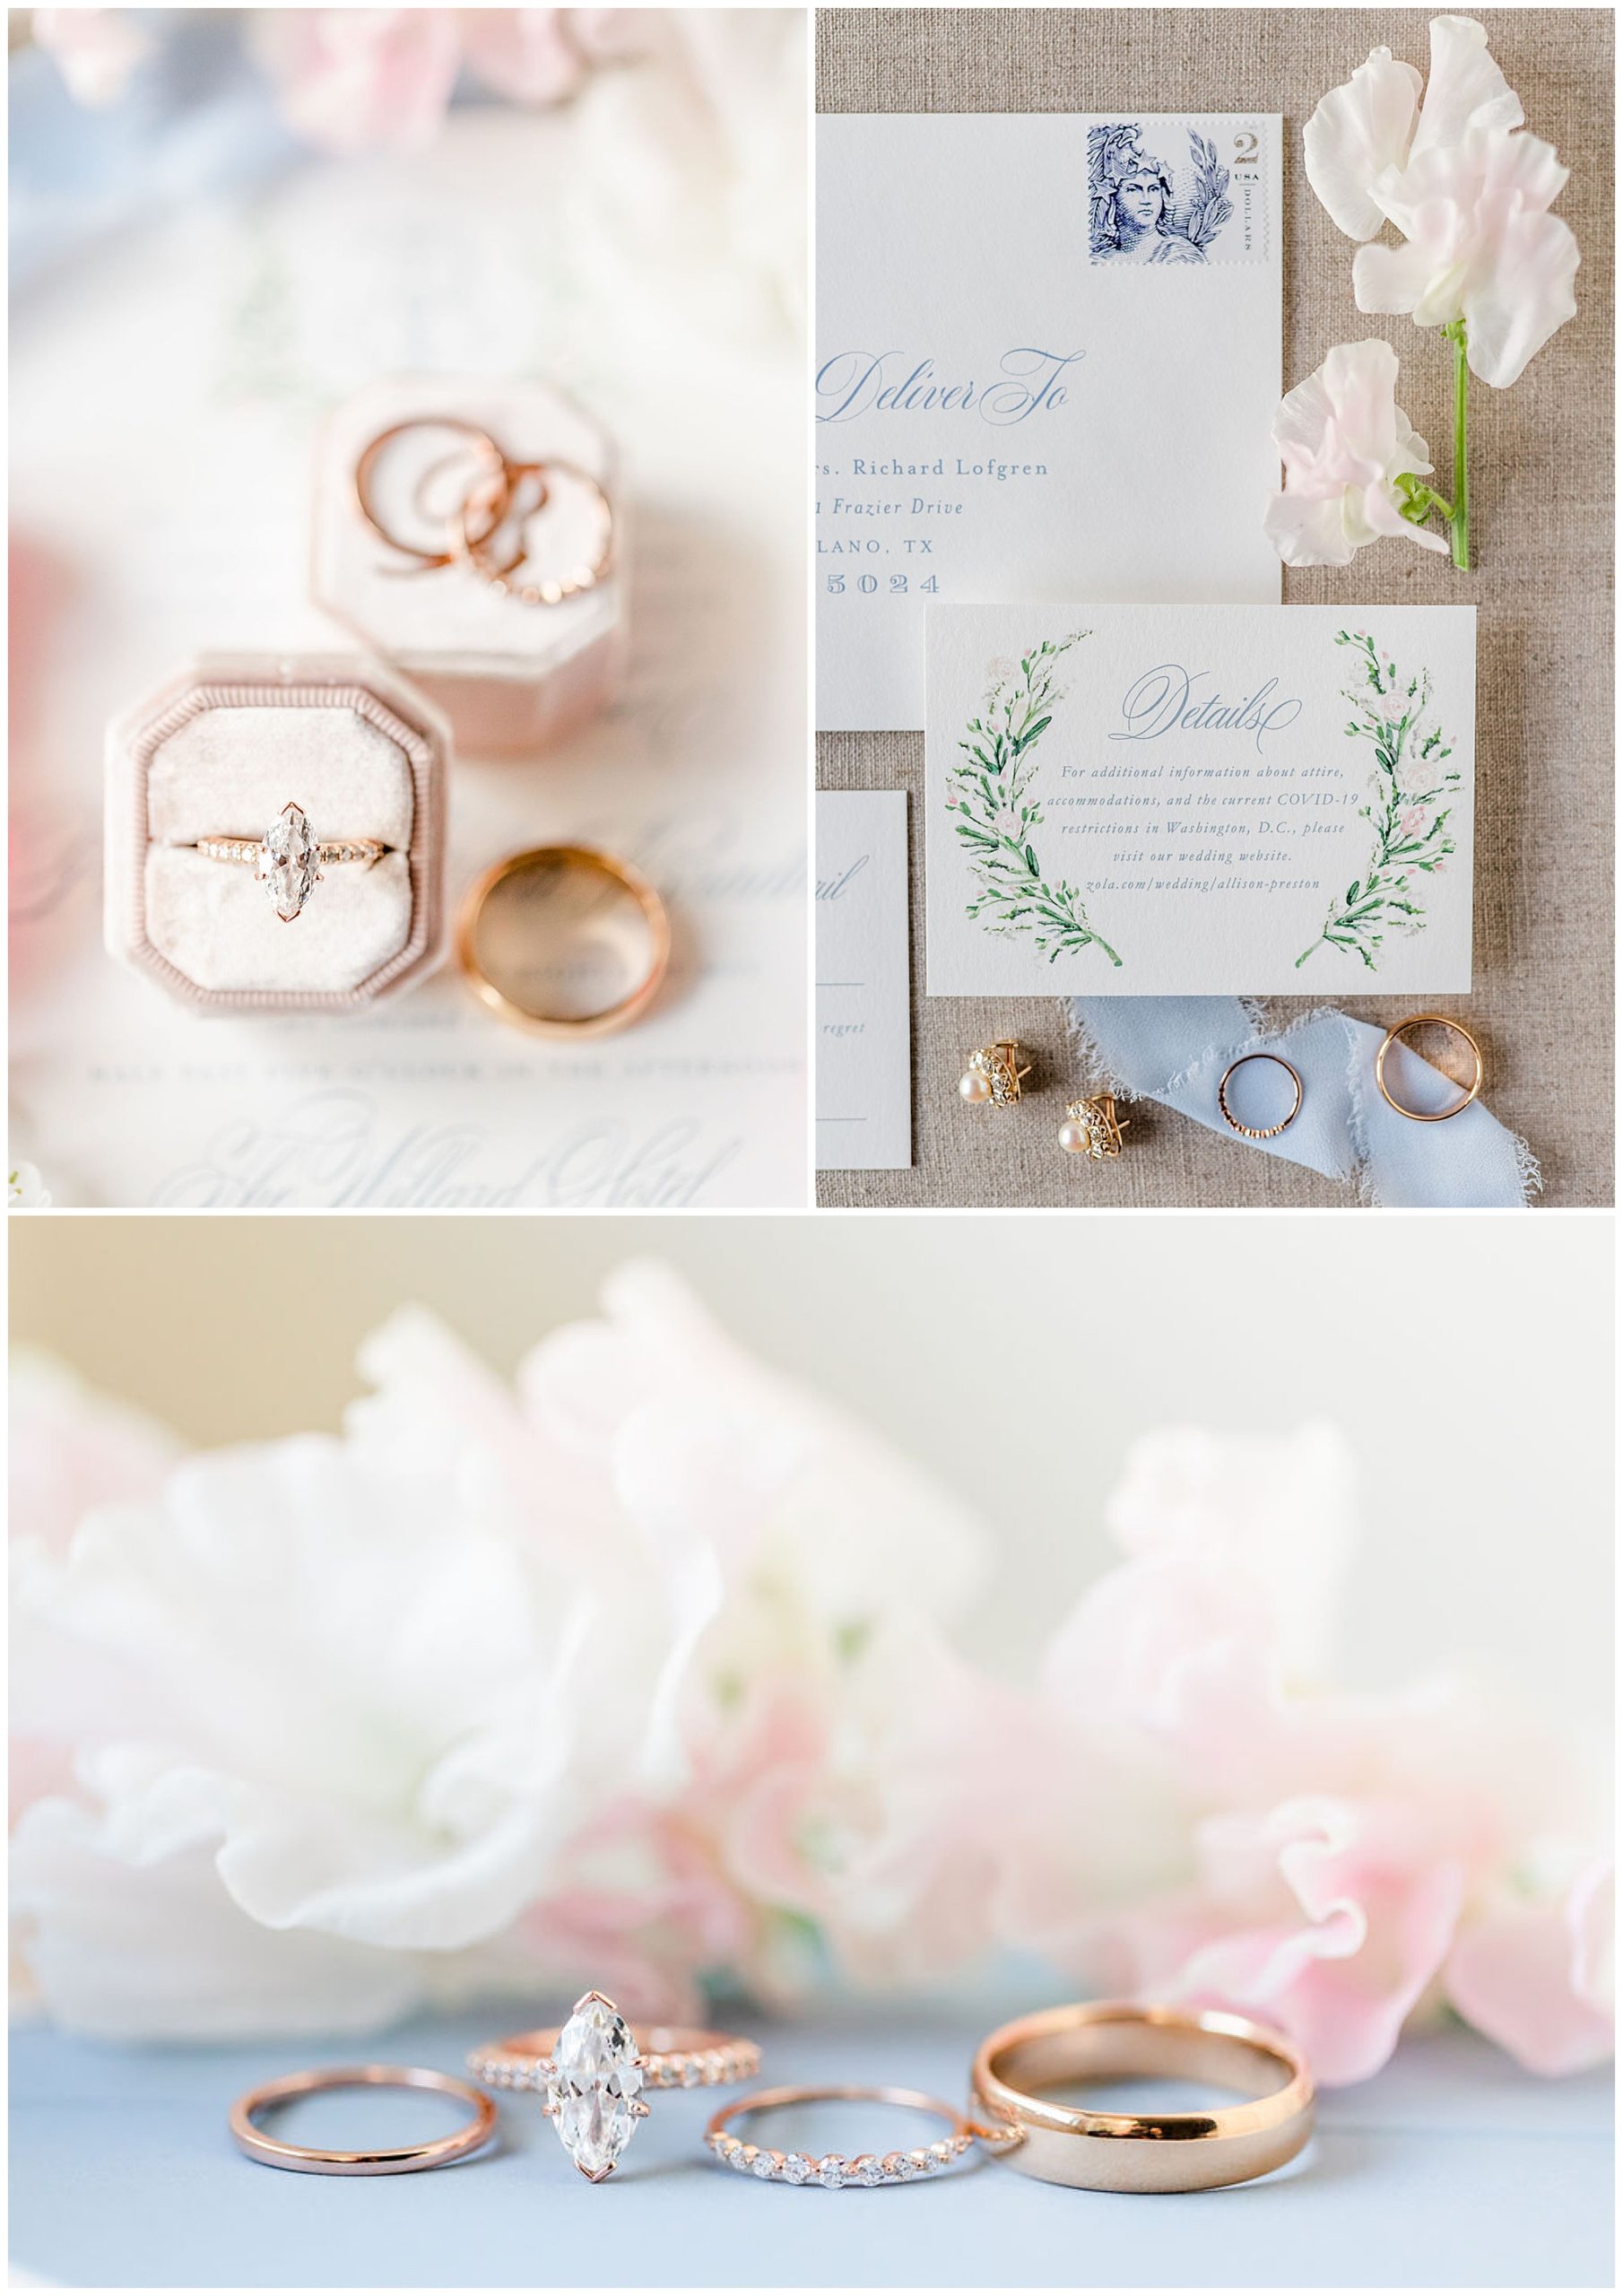 bridal details photo session, bridal details flatlay, flatlay photos, wedding details, wedding details photos, DC wedding photographer, wedding photography details, special wedding photos, flatlay photo session, DC wedding photographer, Rachel E.H. Photography, gold rings in powder pink case, rings in front of white and pink flowers